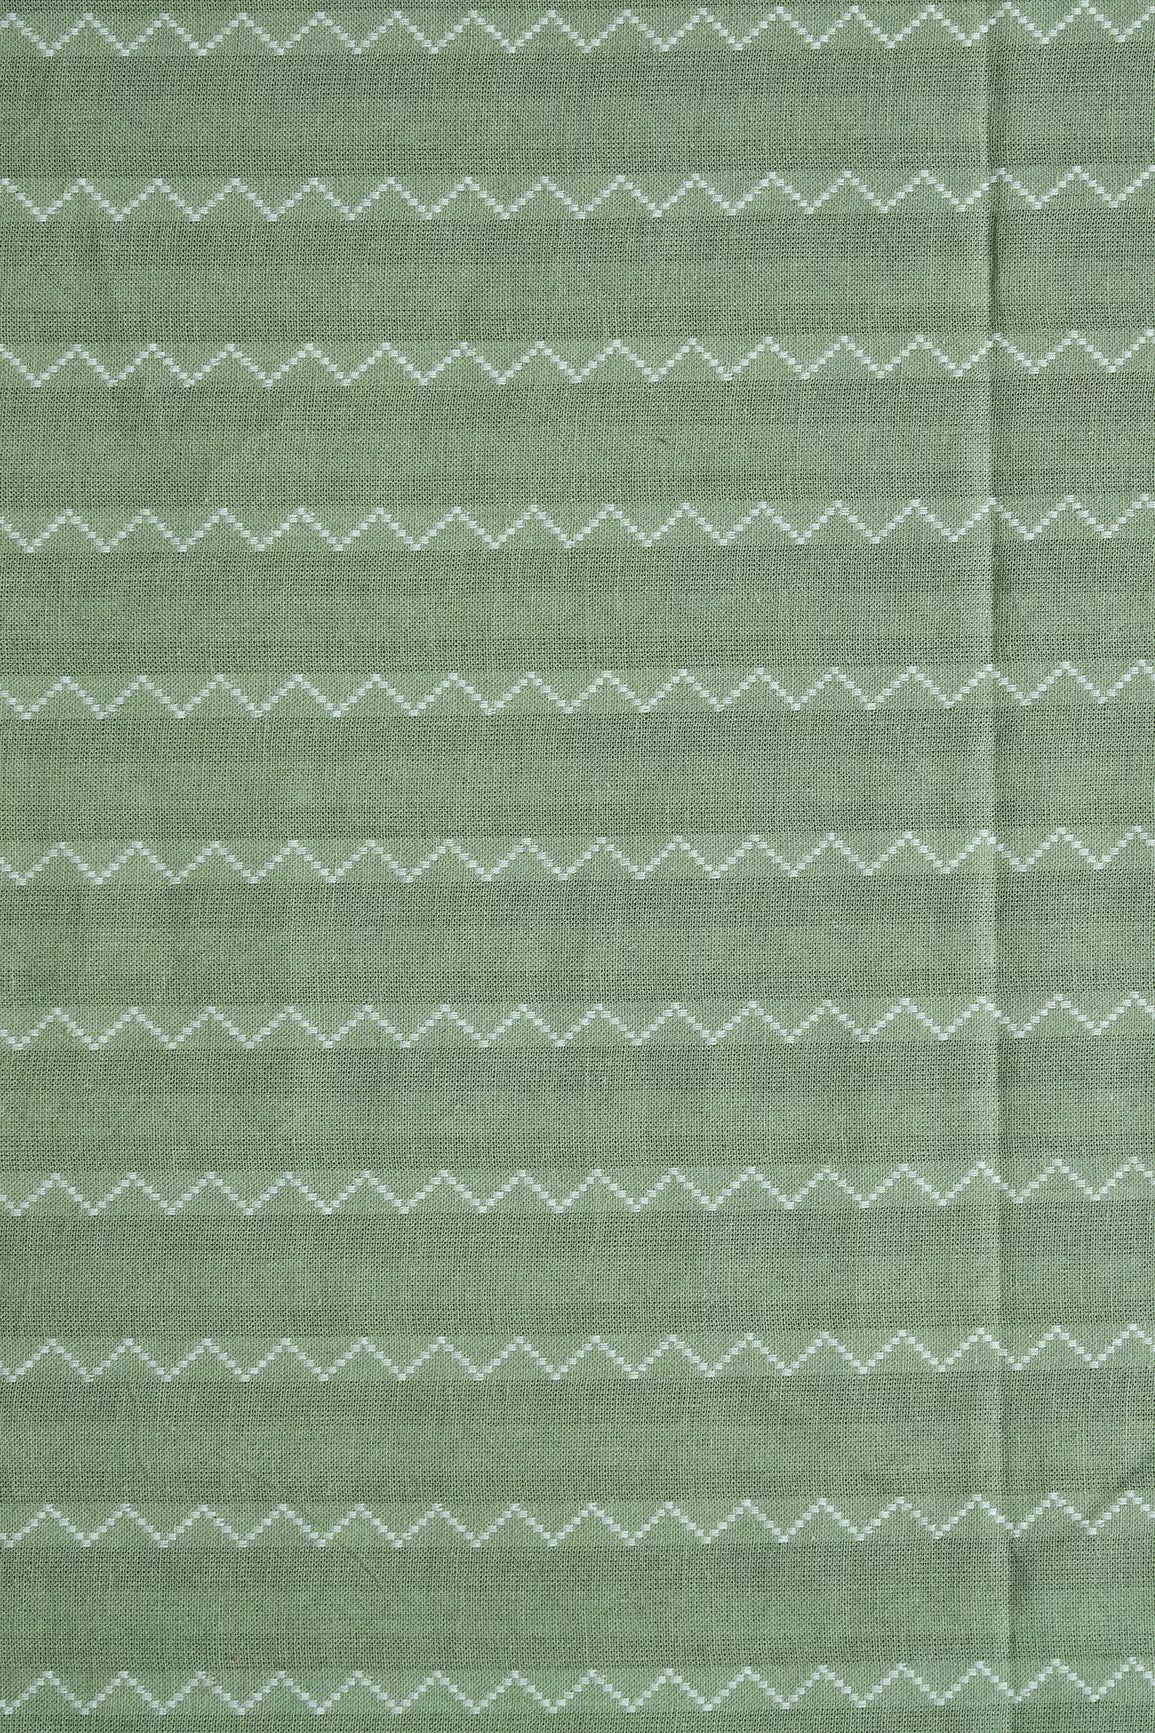 Olive And White Chevron Pattern On Handwoven Organic Cotton Fabric